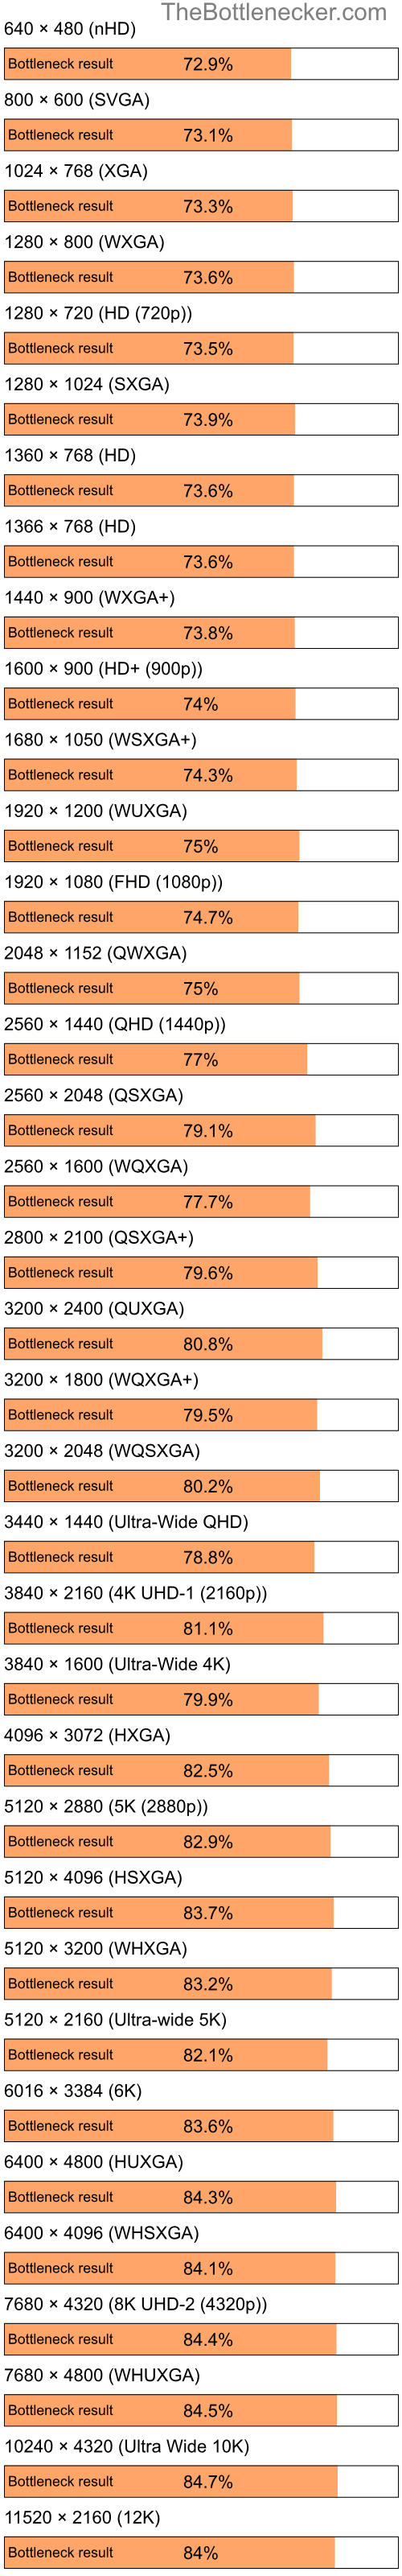 Bottleneck results by resolution for Intel Pentium 4 and AMD Radeon X1270 in Processor Intense Tasks